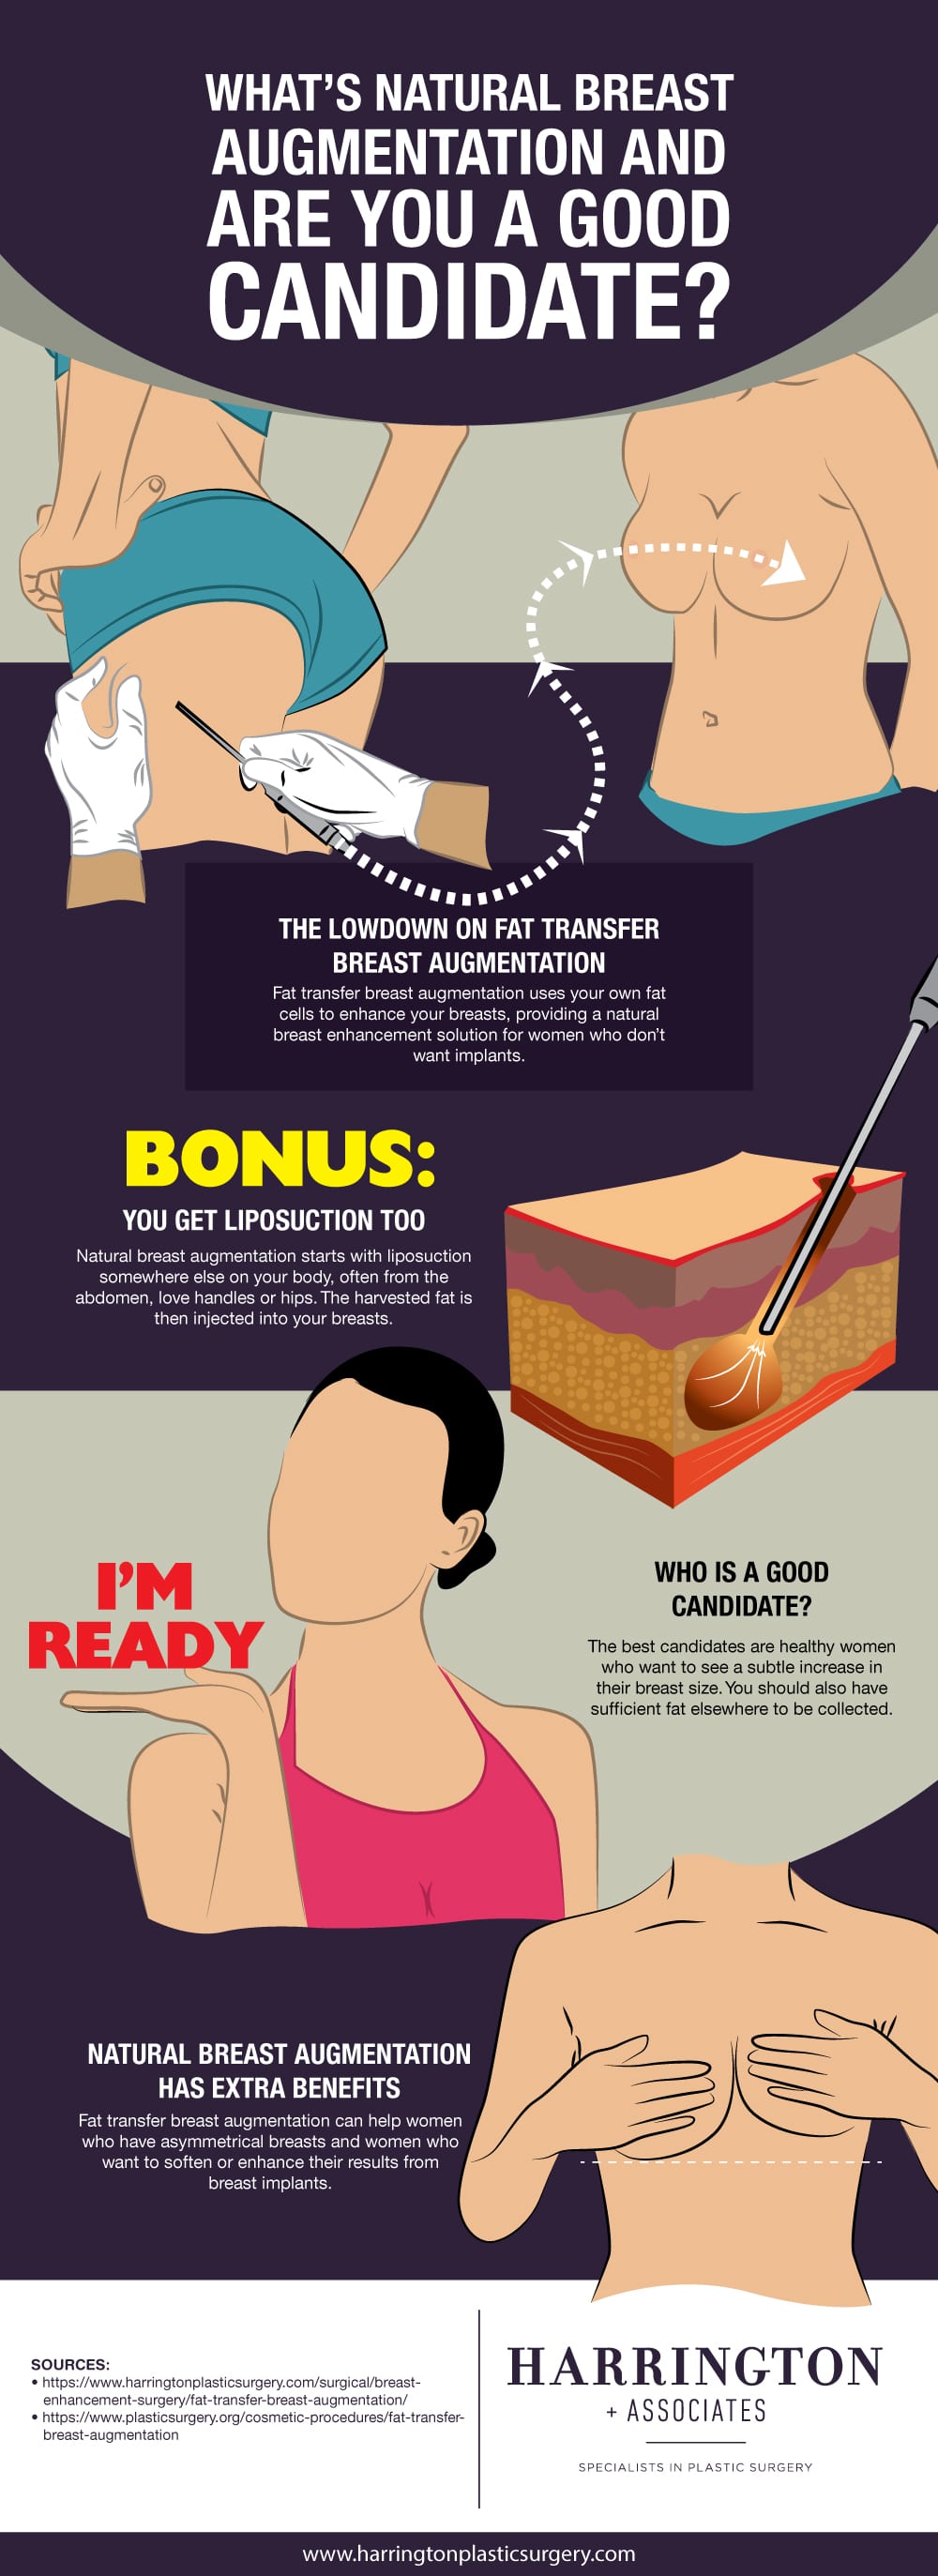 natural breast augmentation infographic